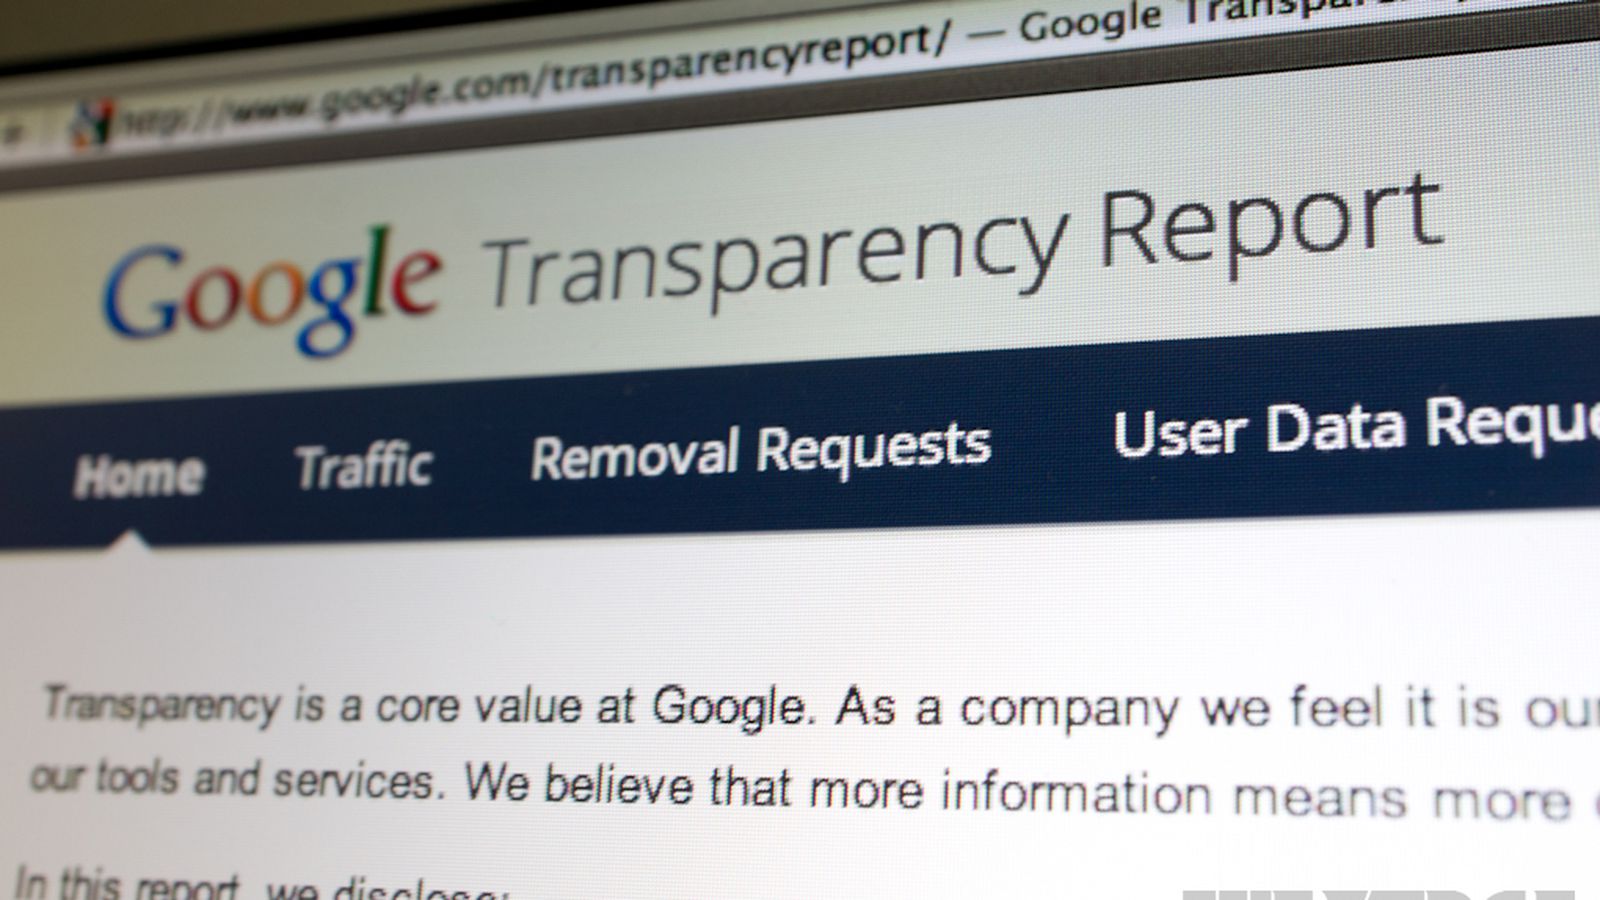 Google’s “Transparency Report” Shows Requests for User Information